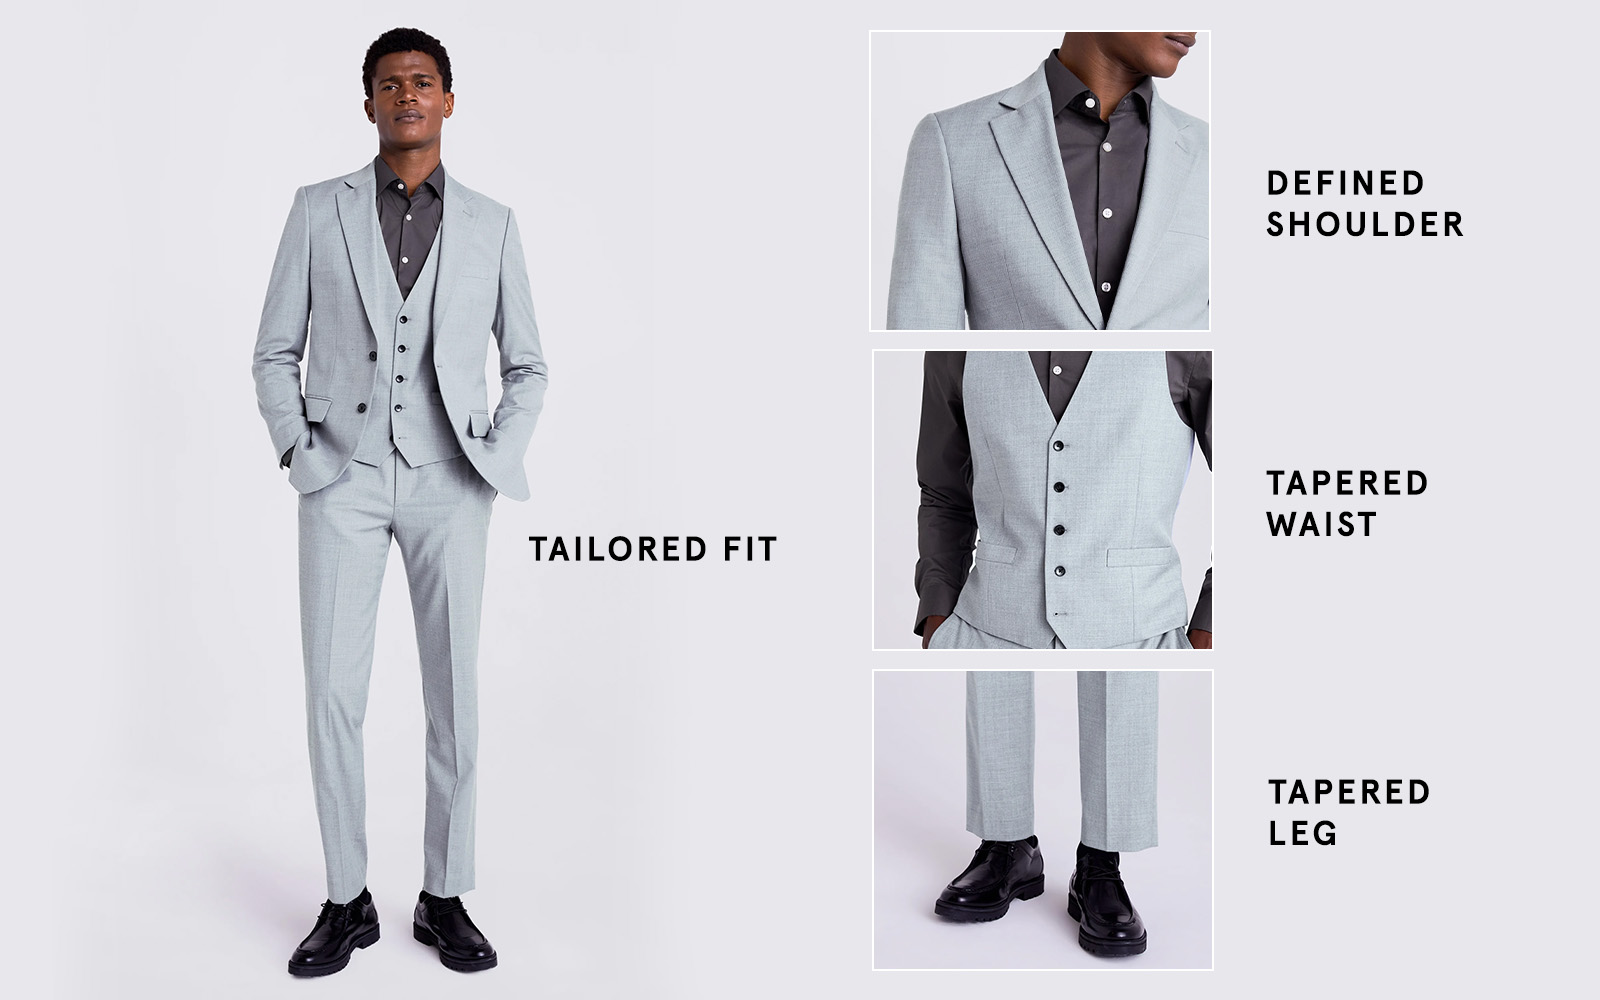 The Best Suit Choices for Formal Events – StudioSuits